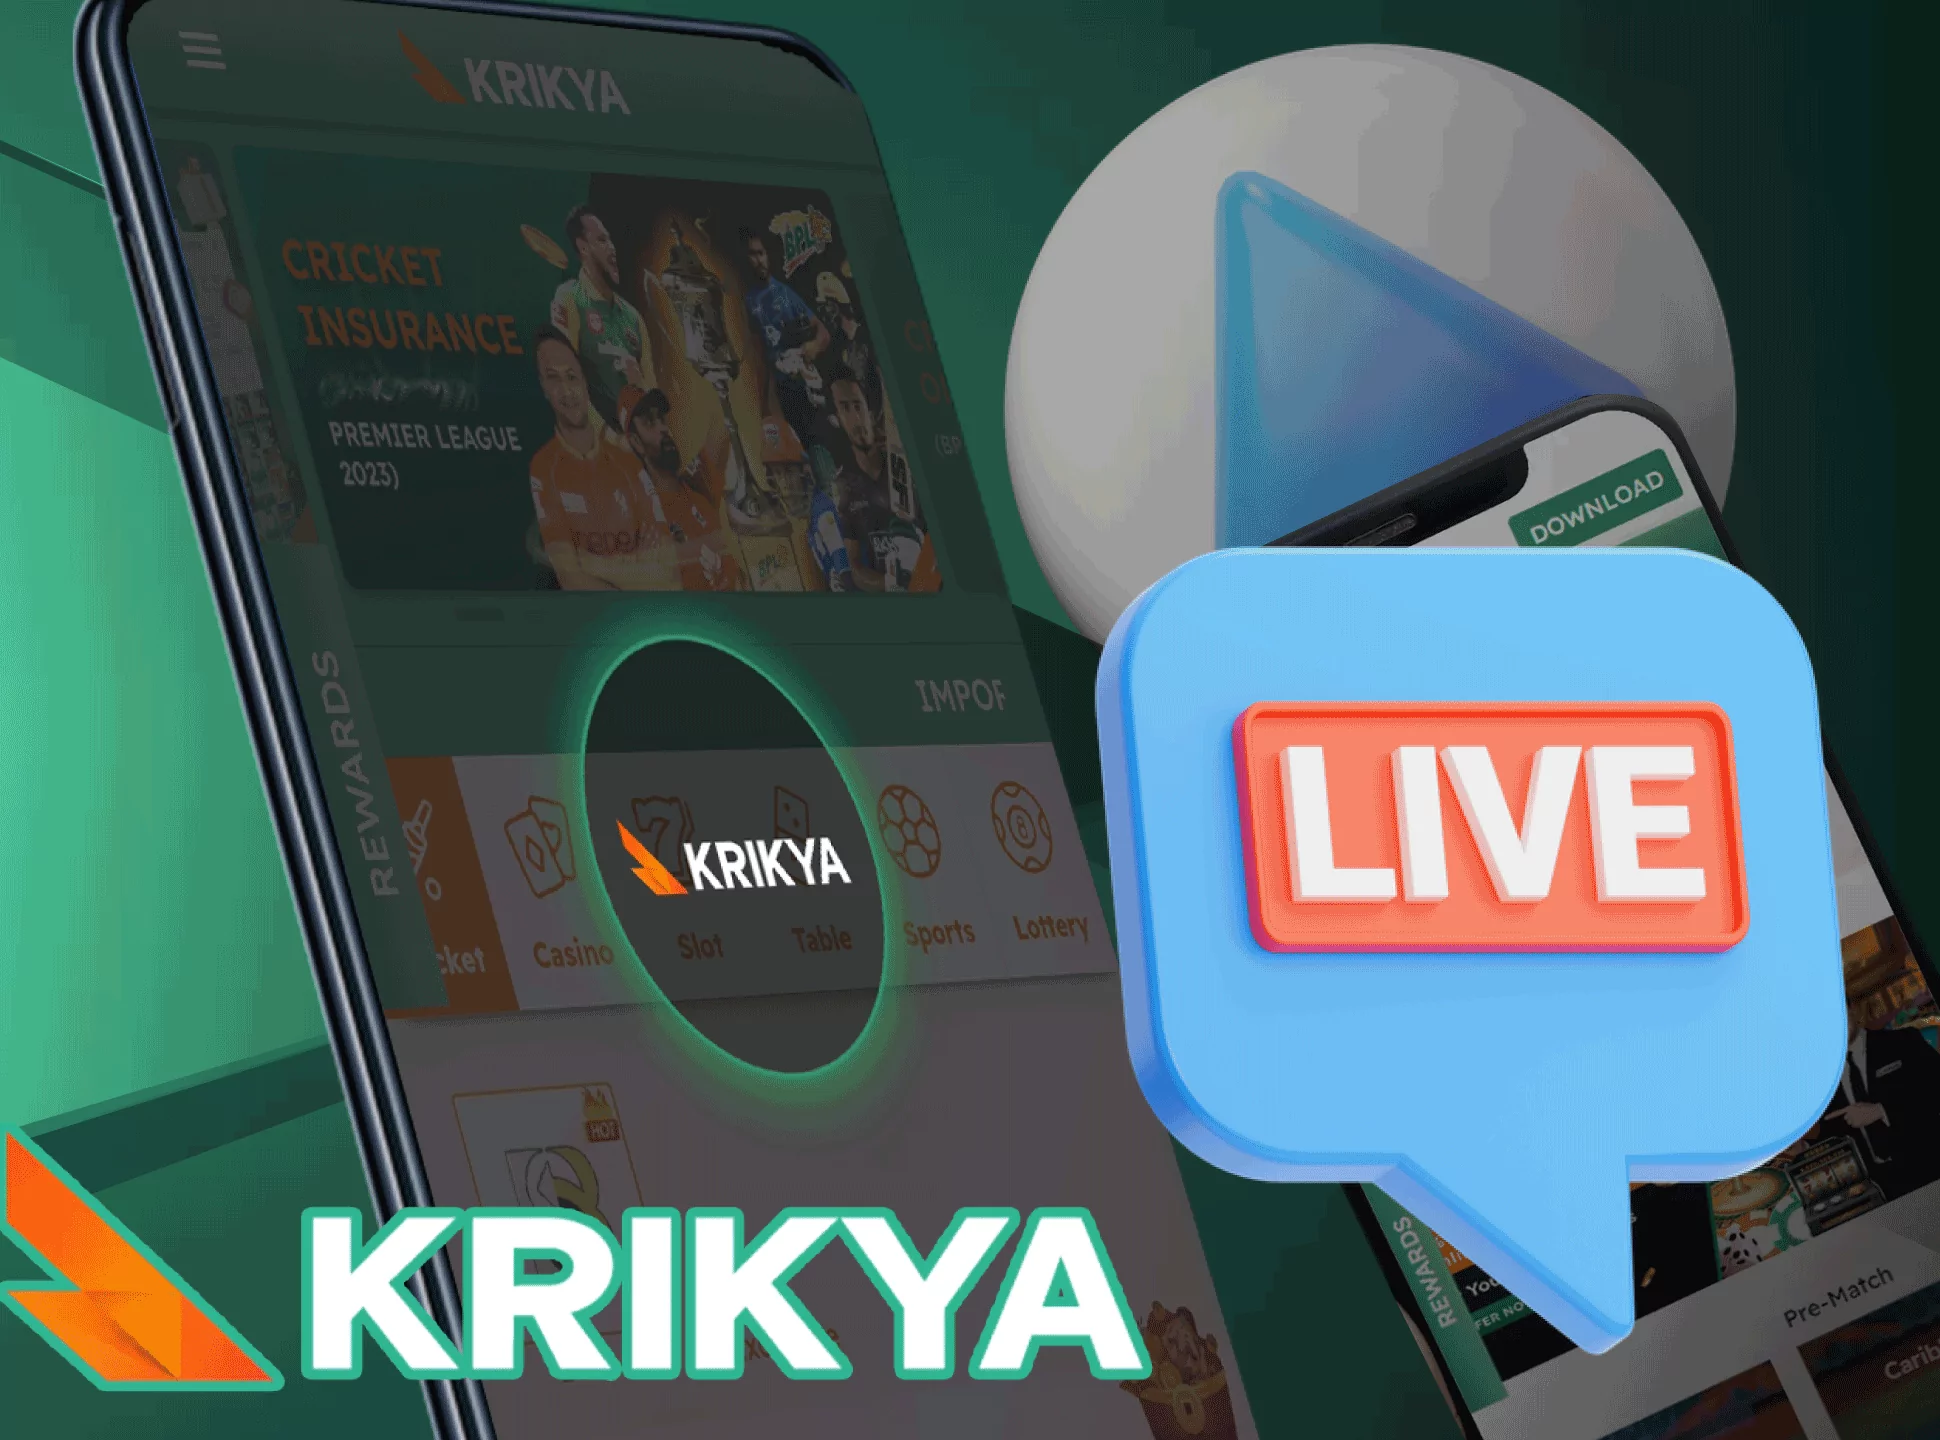 You can watch the live streamings of the matches right on the Krikya website.